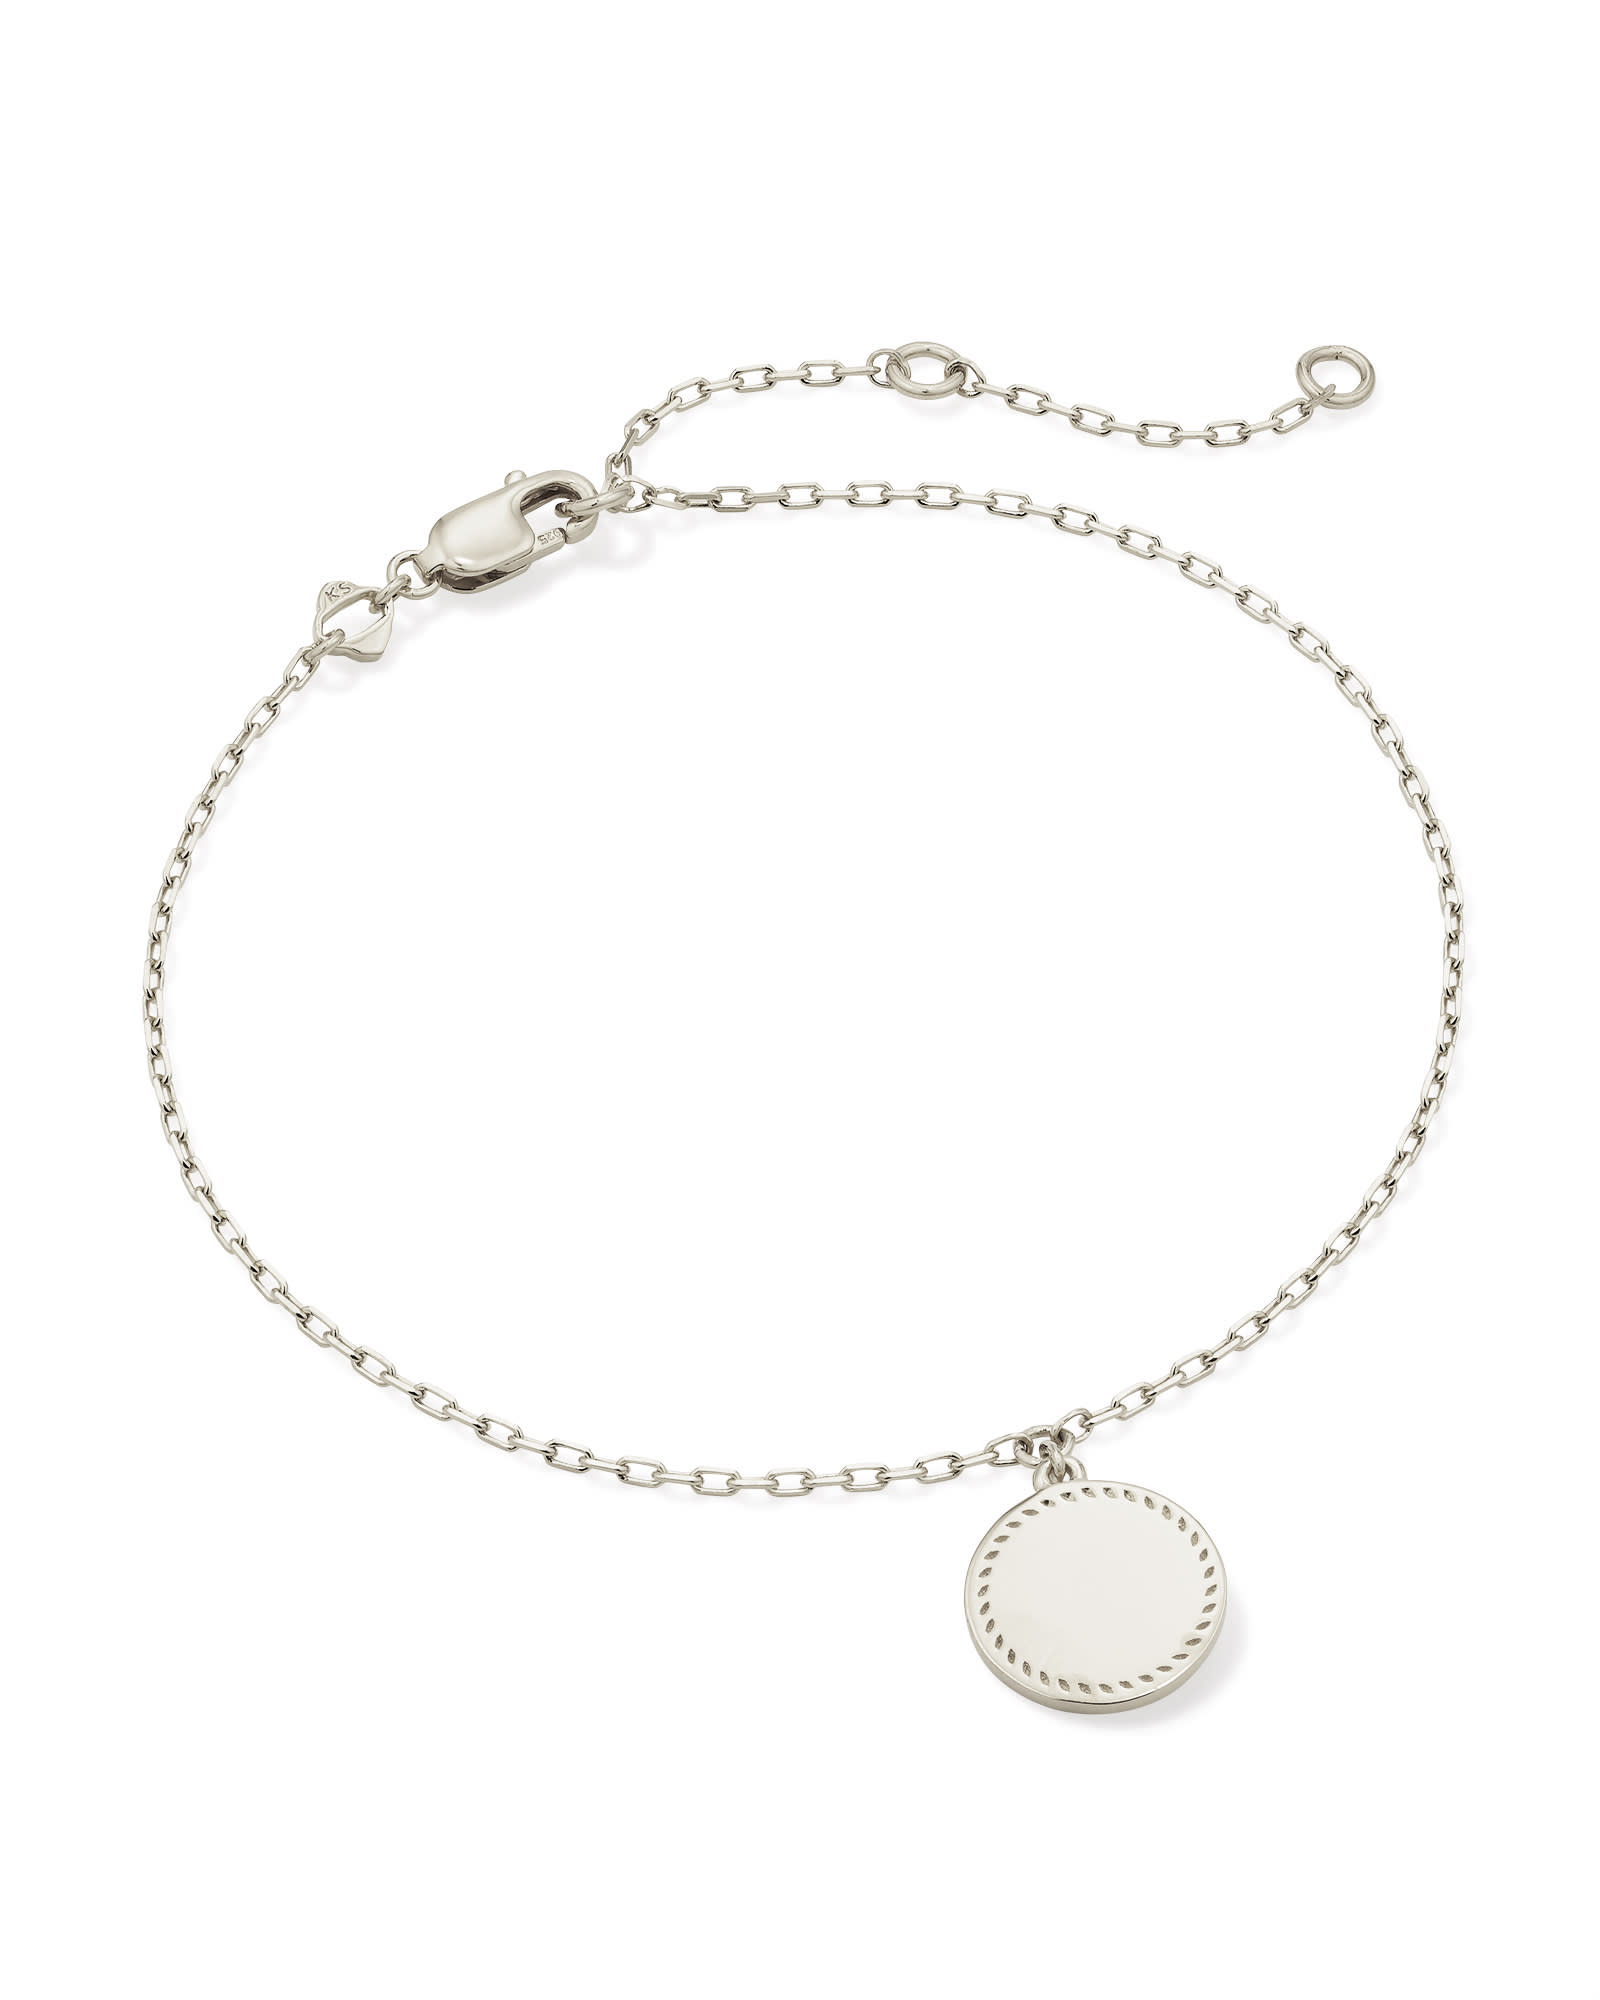 Small Aubree Delicate Chain Bracelet in Sterling Silver